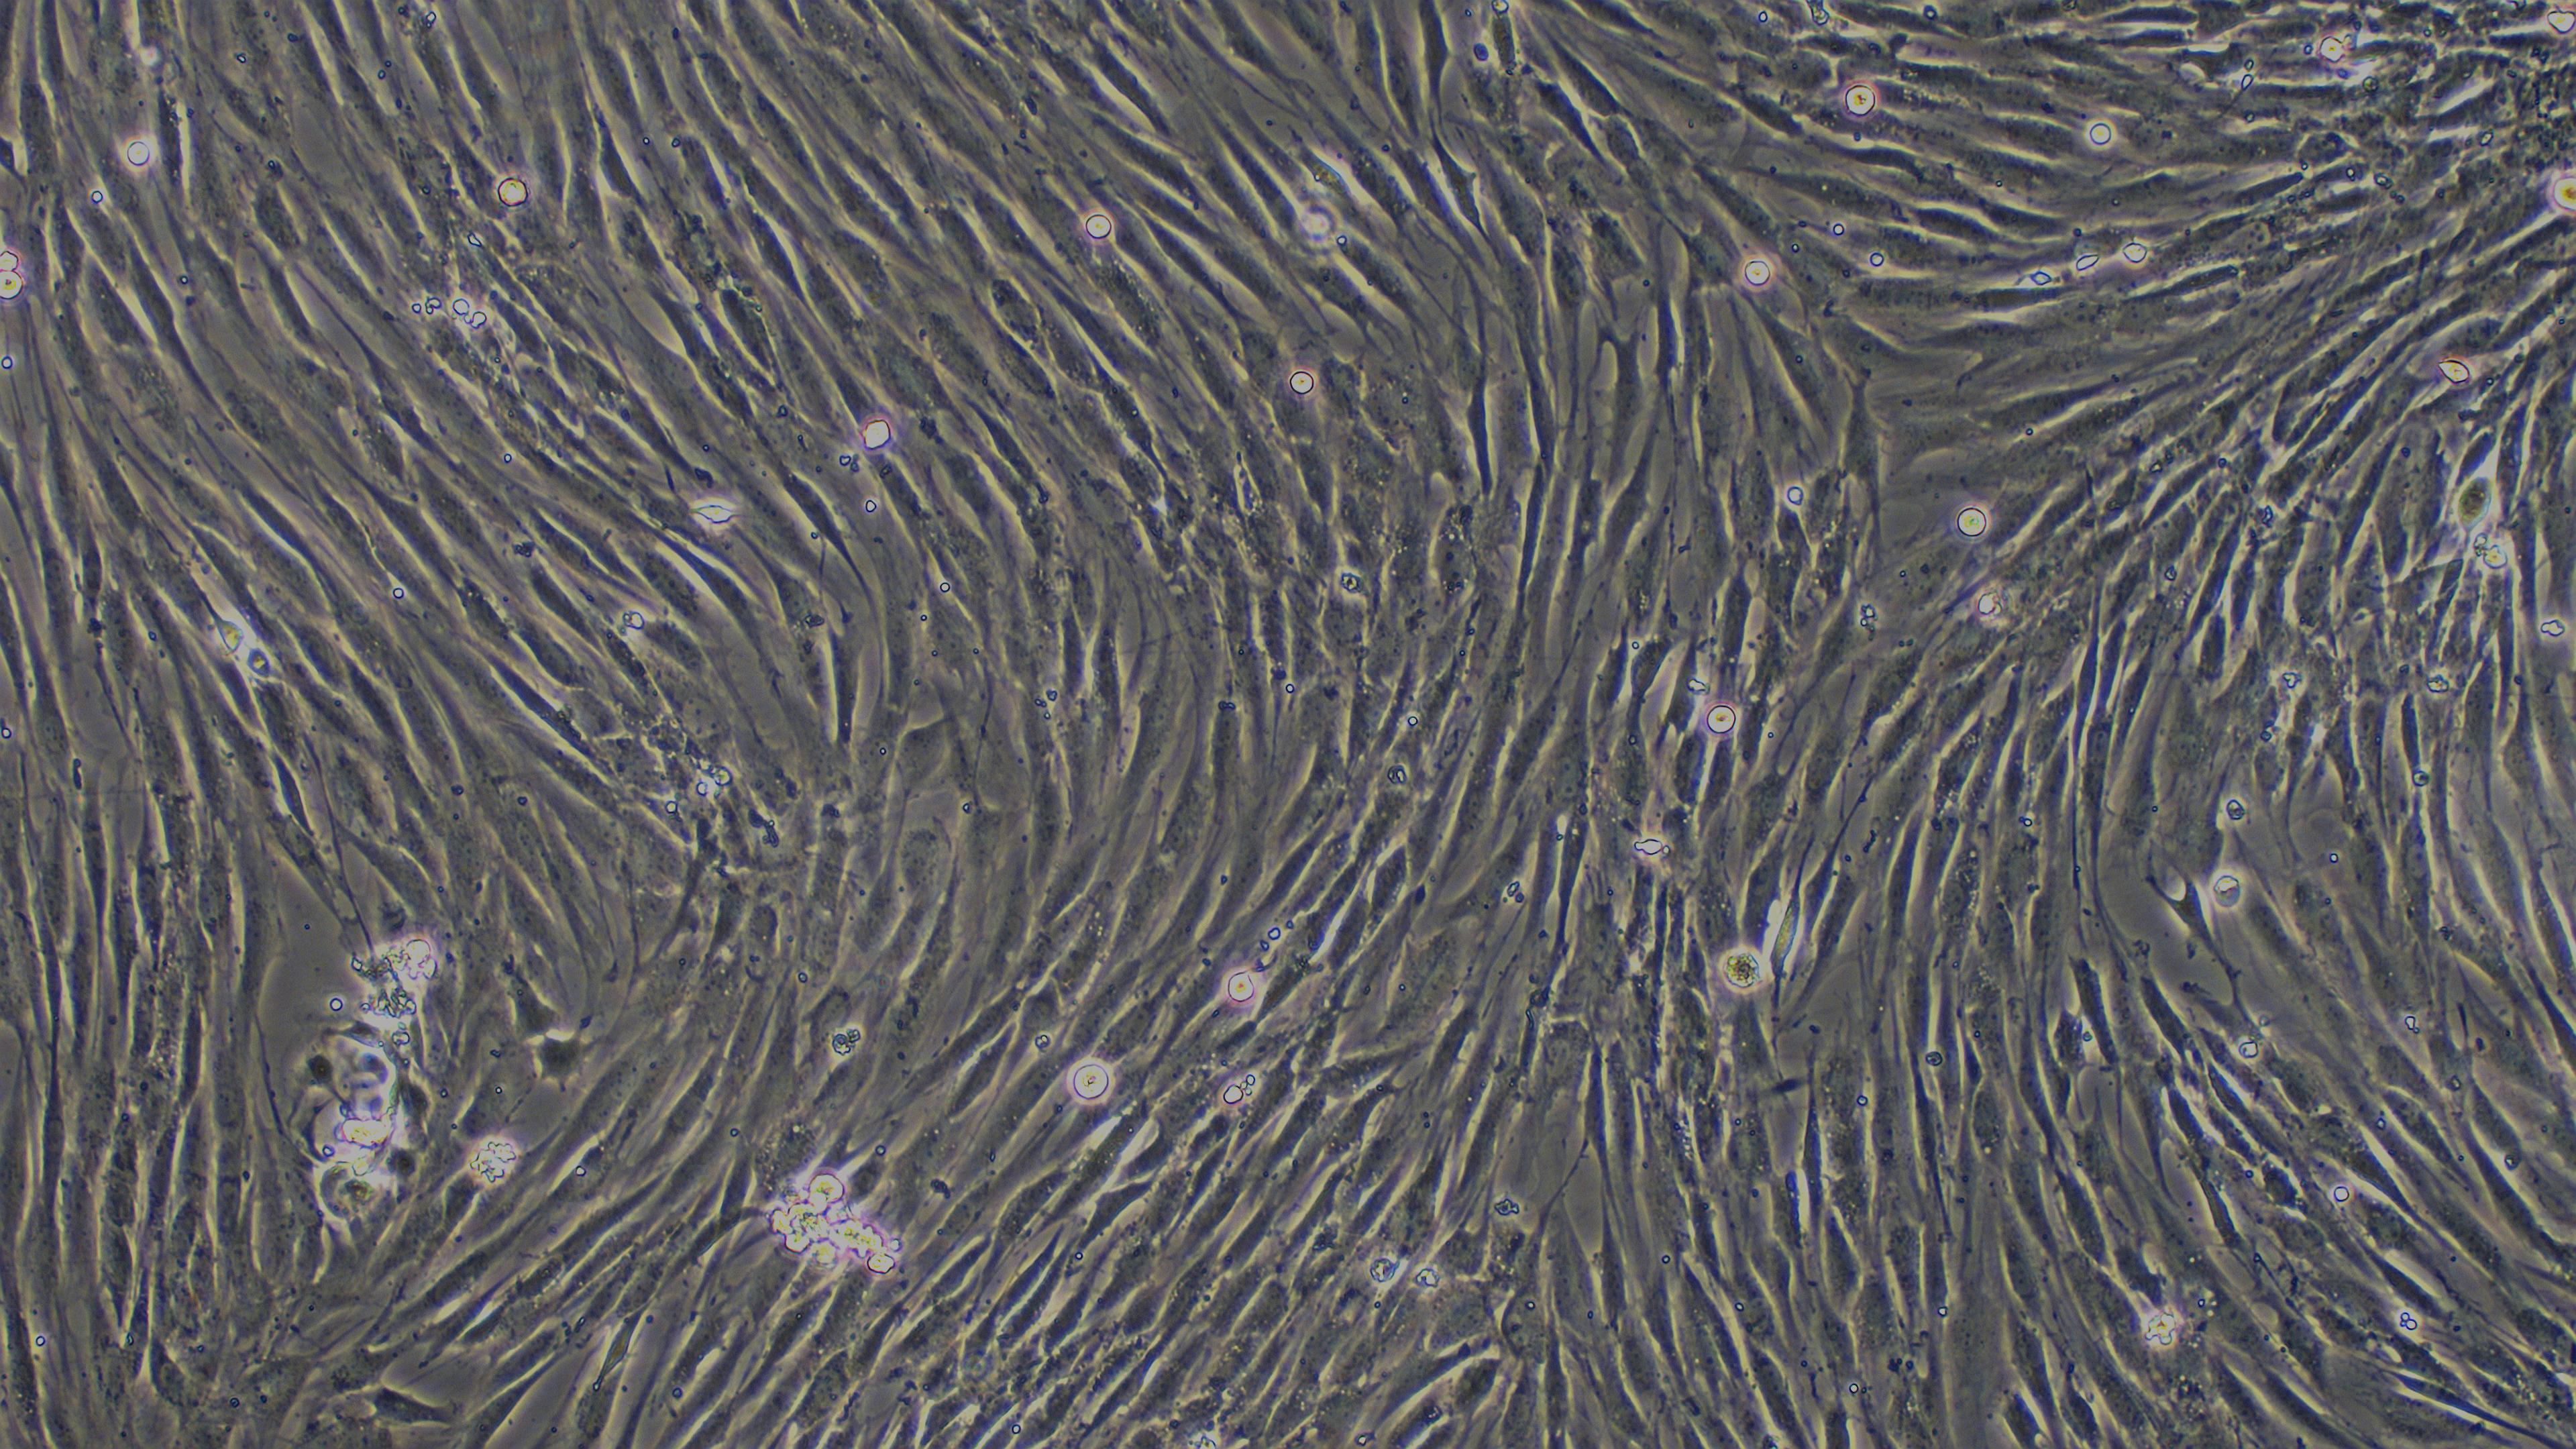 Primary Canine Synovial Cells (SYC)